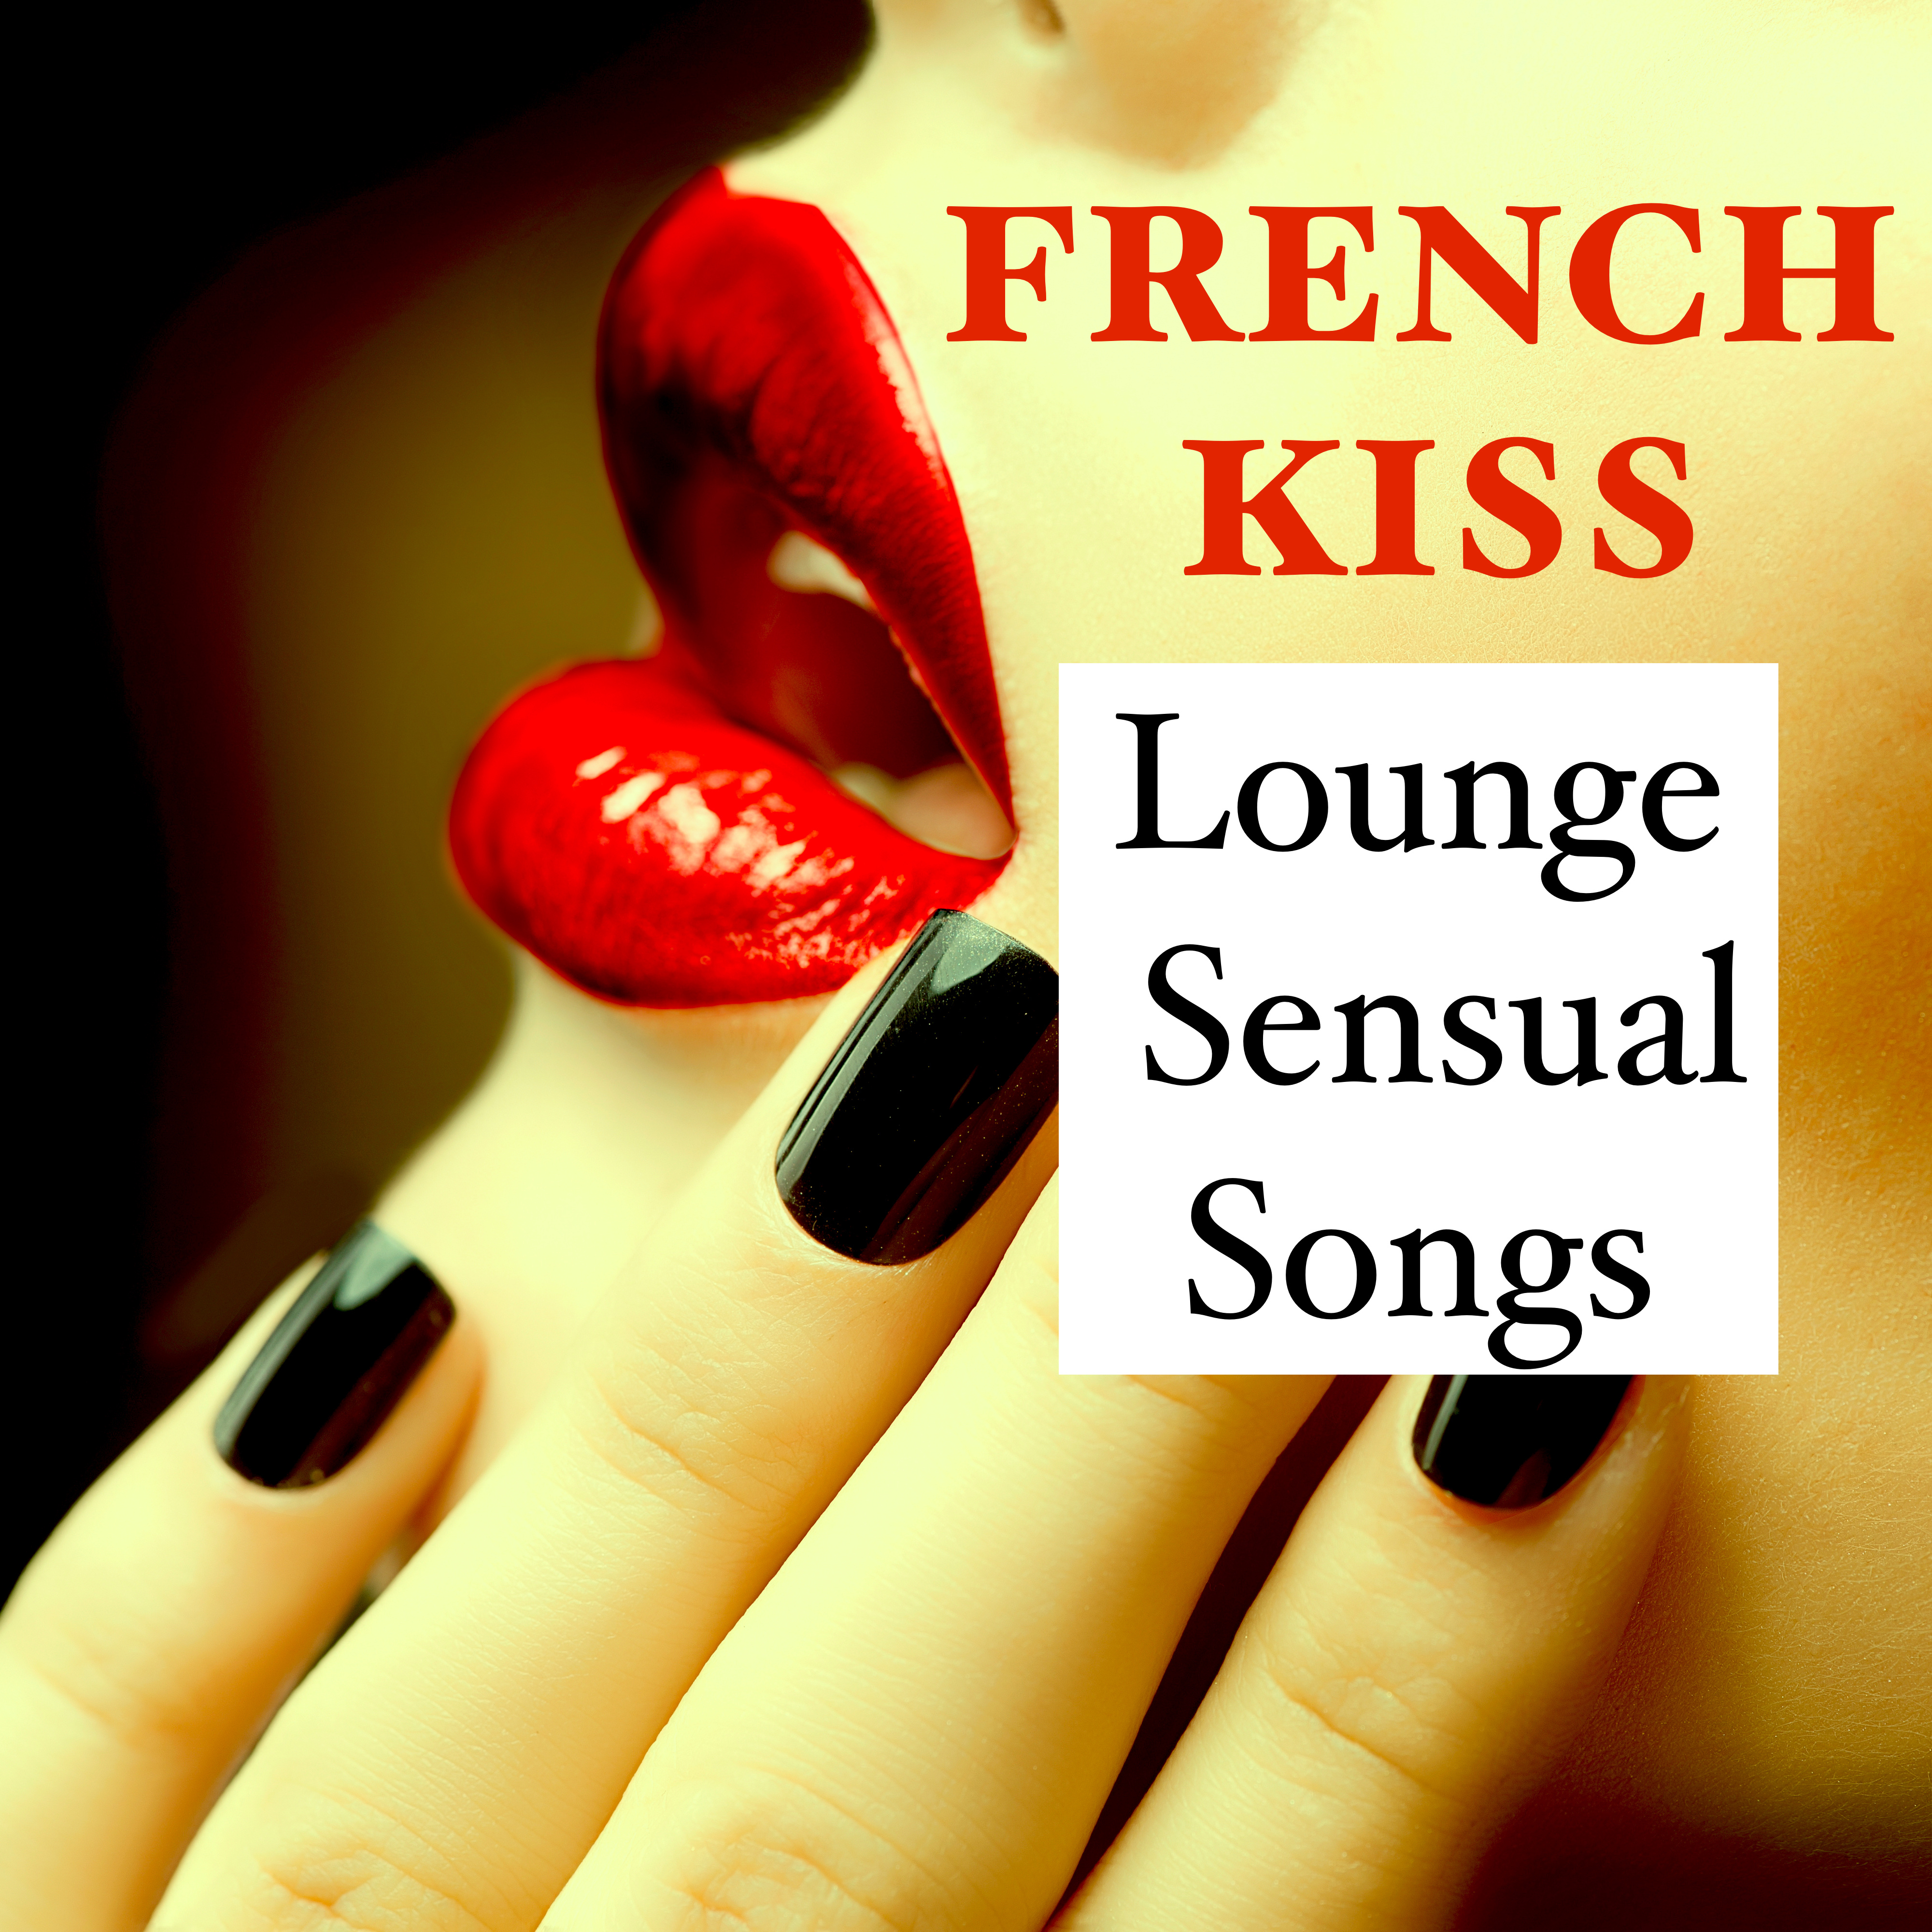 French Kiss  Lounge Sensual Songs for Romantic Amazing First Kiss on Valentine' s Day